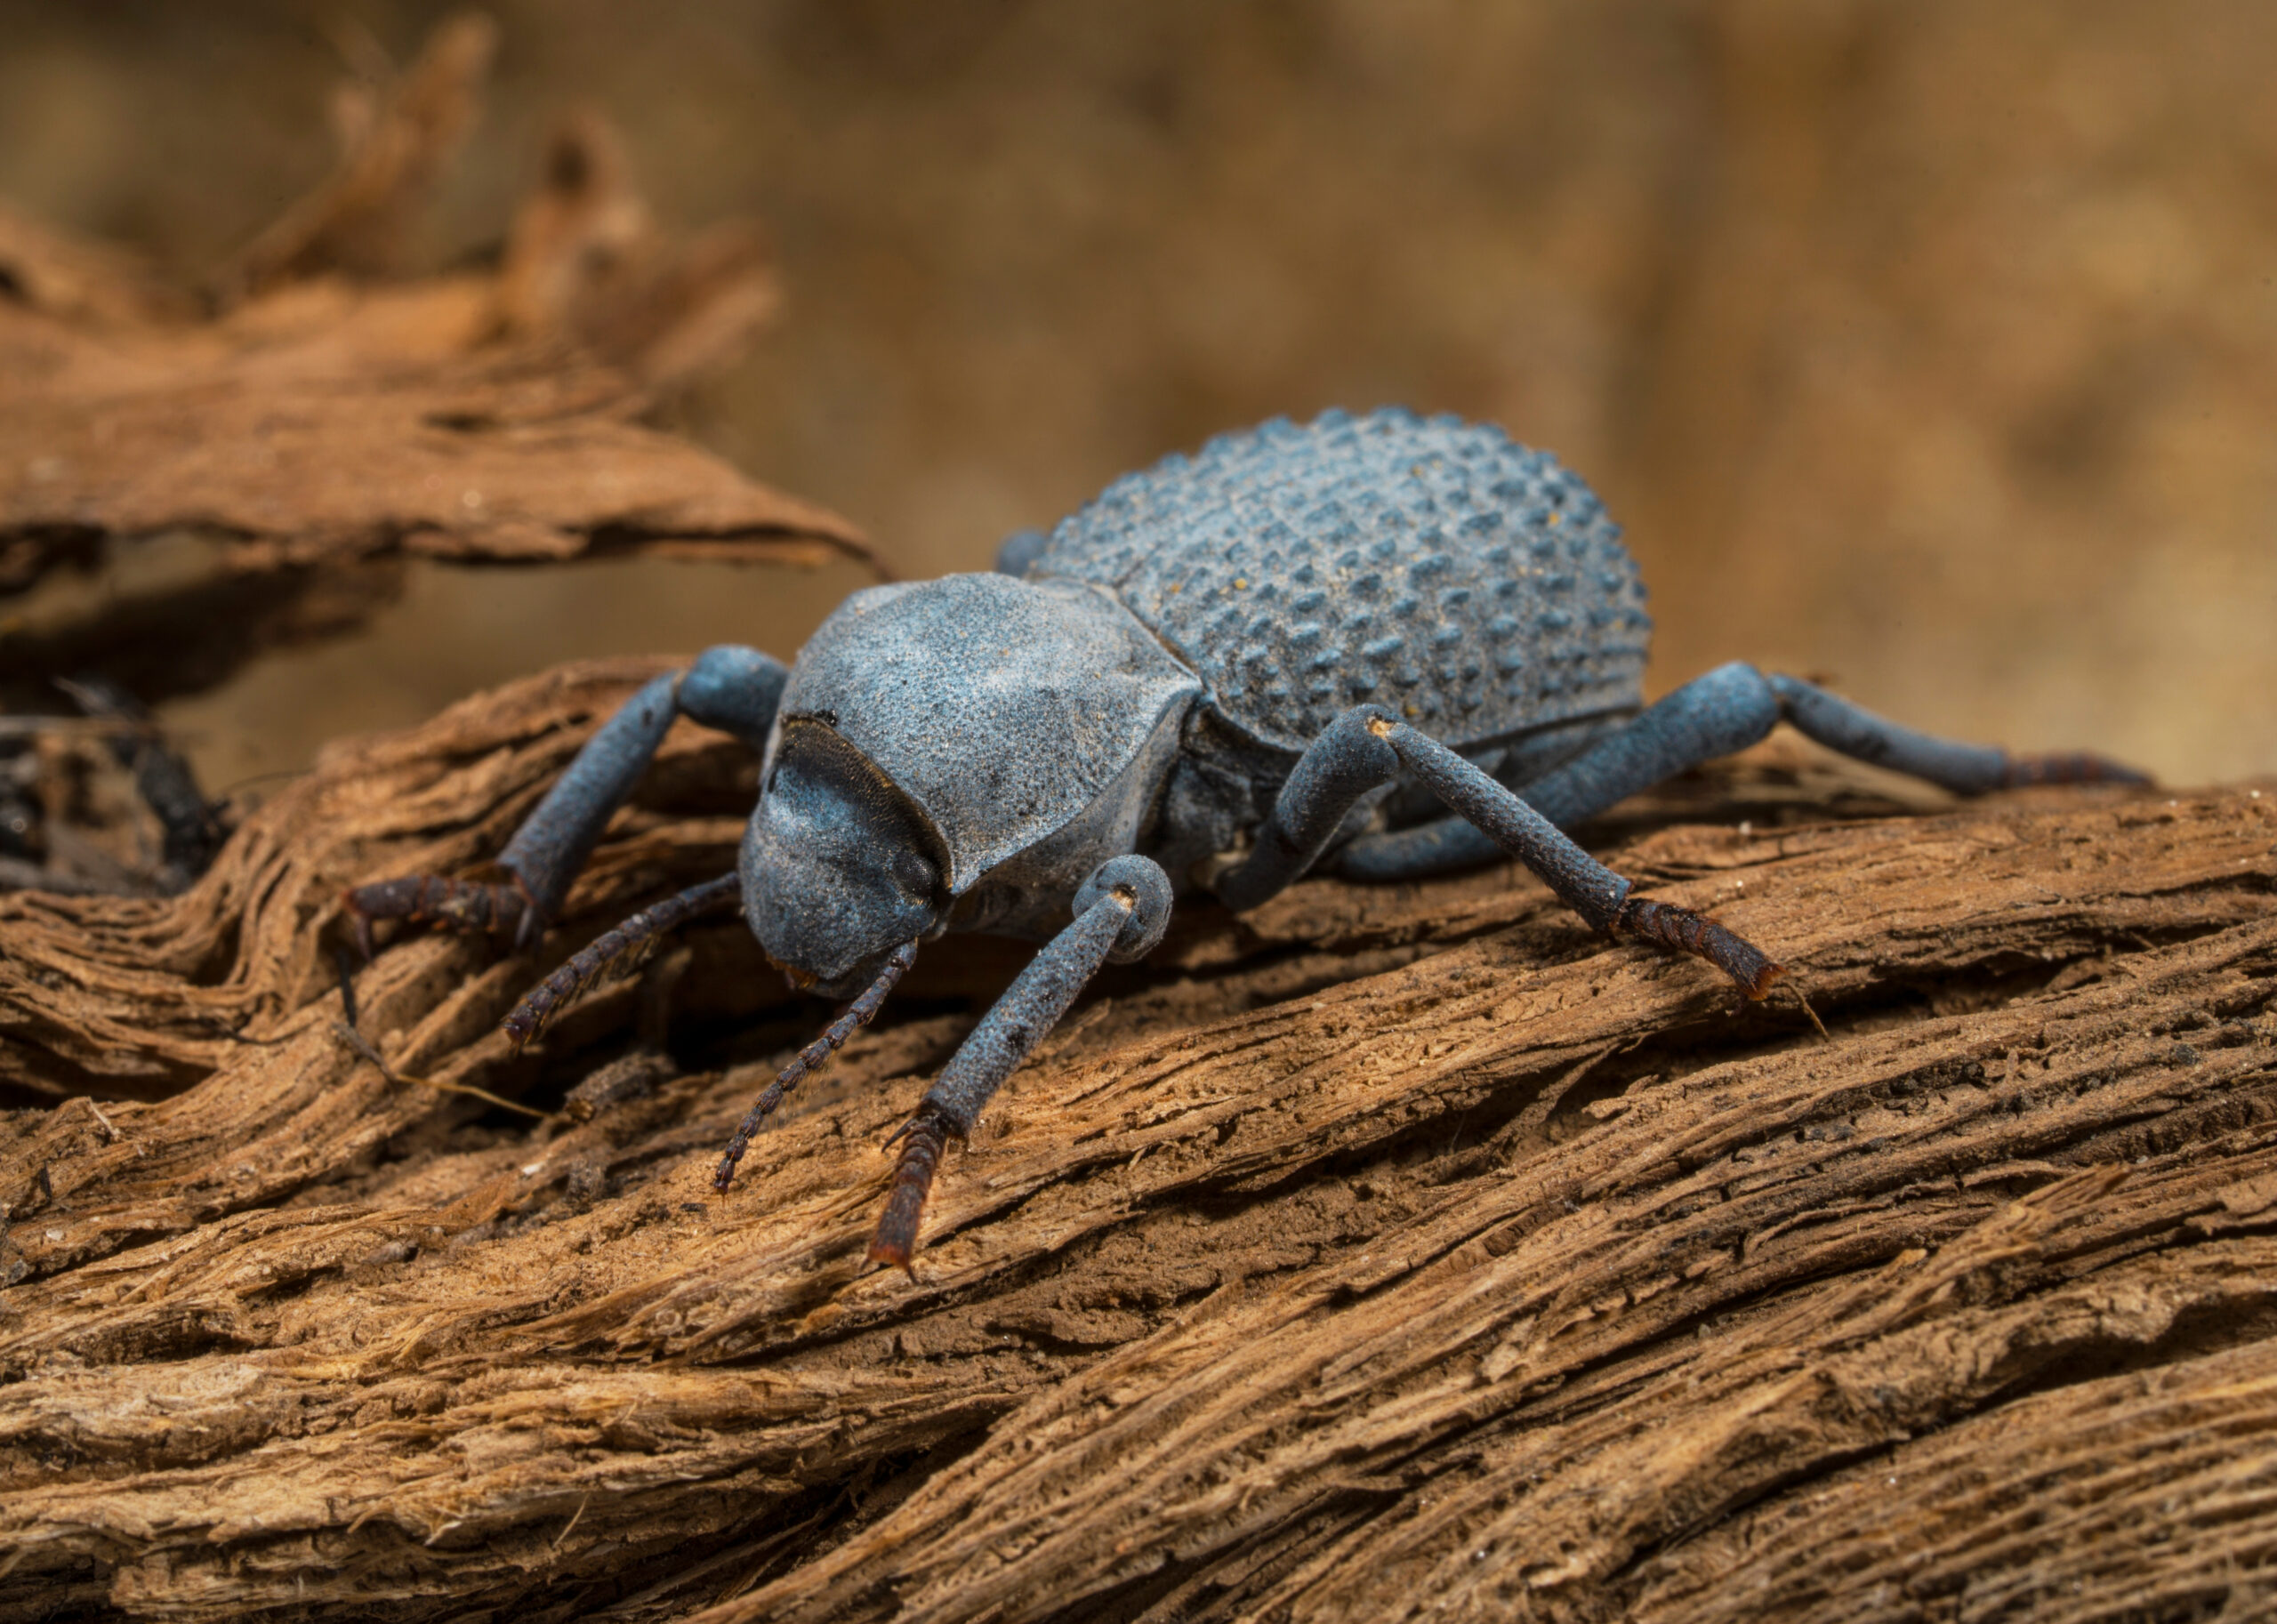 This macro image shows a detailed view of an Asbolus beetle, a type of darkling beetle. The beetle is about 1 inch in length and has a dark blue or black exoskeleton with rough, warty bumps on its elytra (hardened forewings).